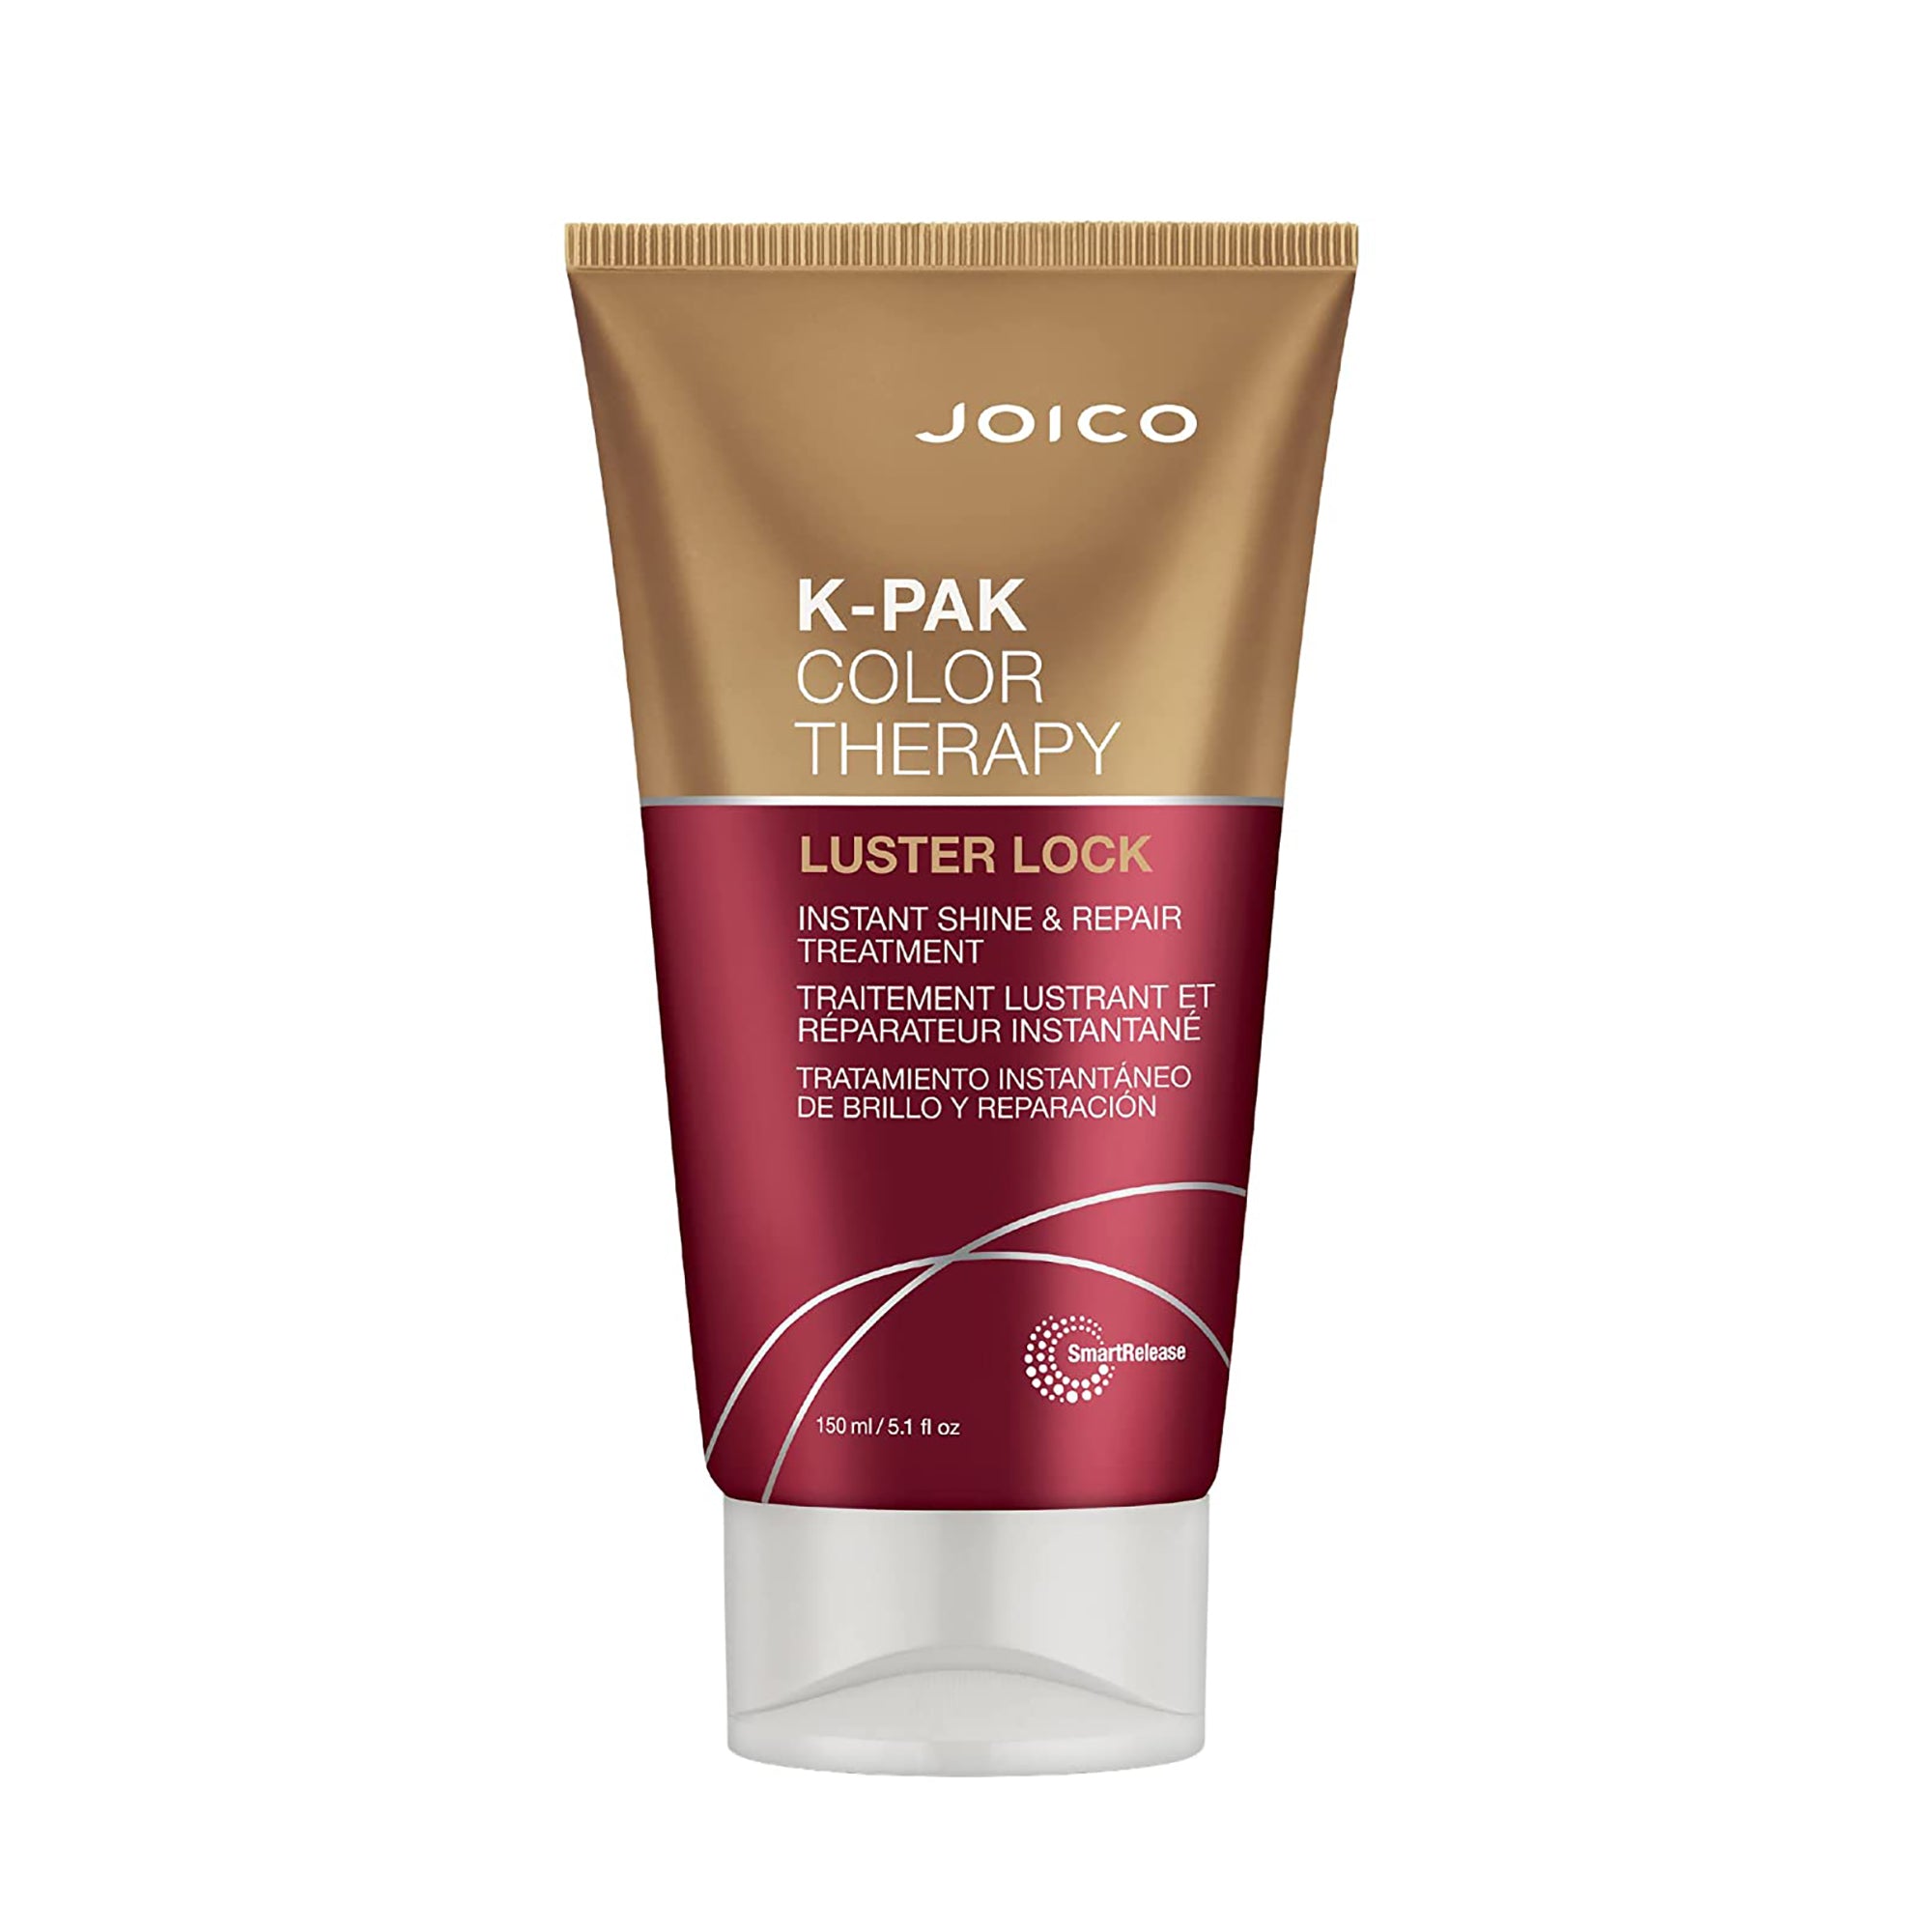 Joico K-PAK Color Therapy Luster Lock Instant Shine & Repair Treatment / 5.1OZ